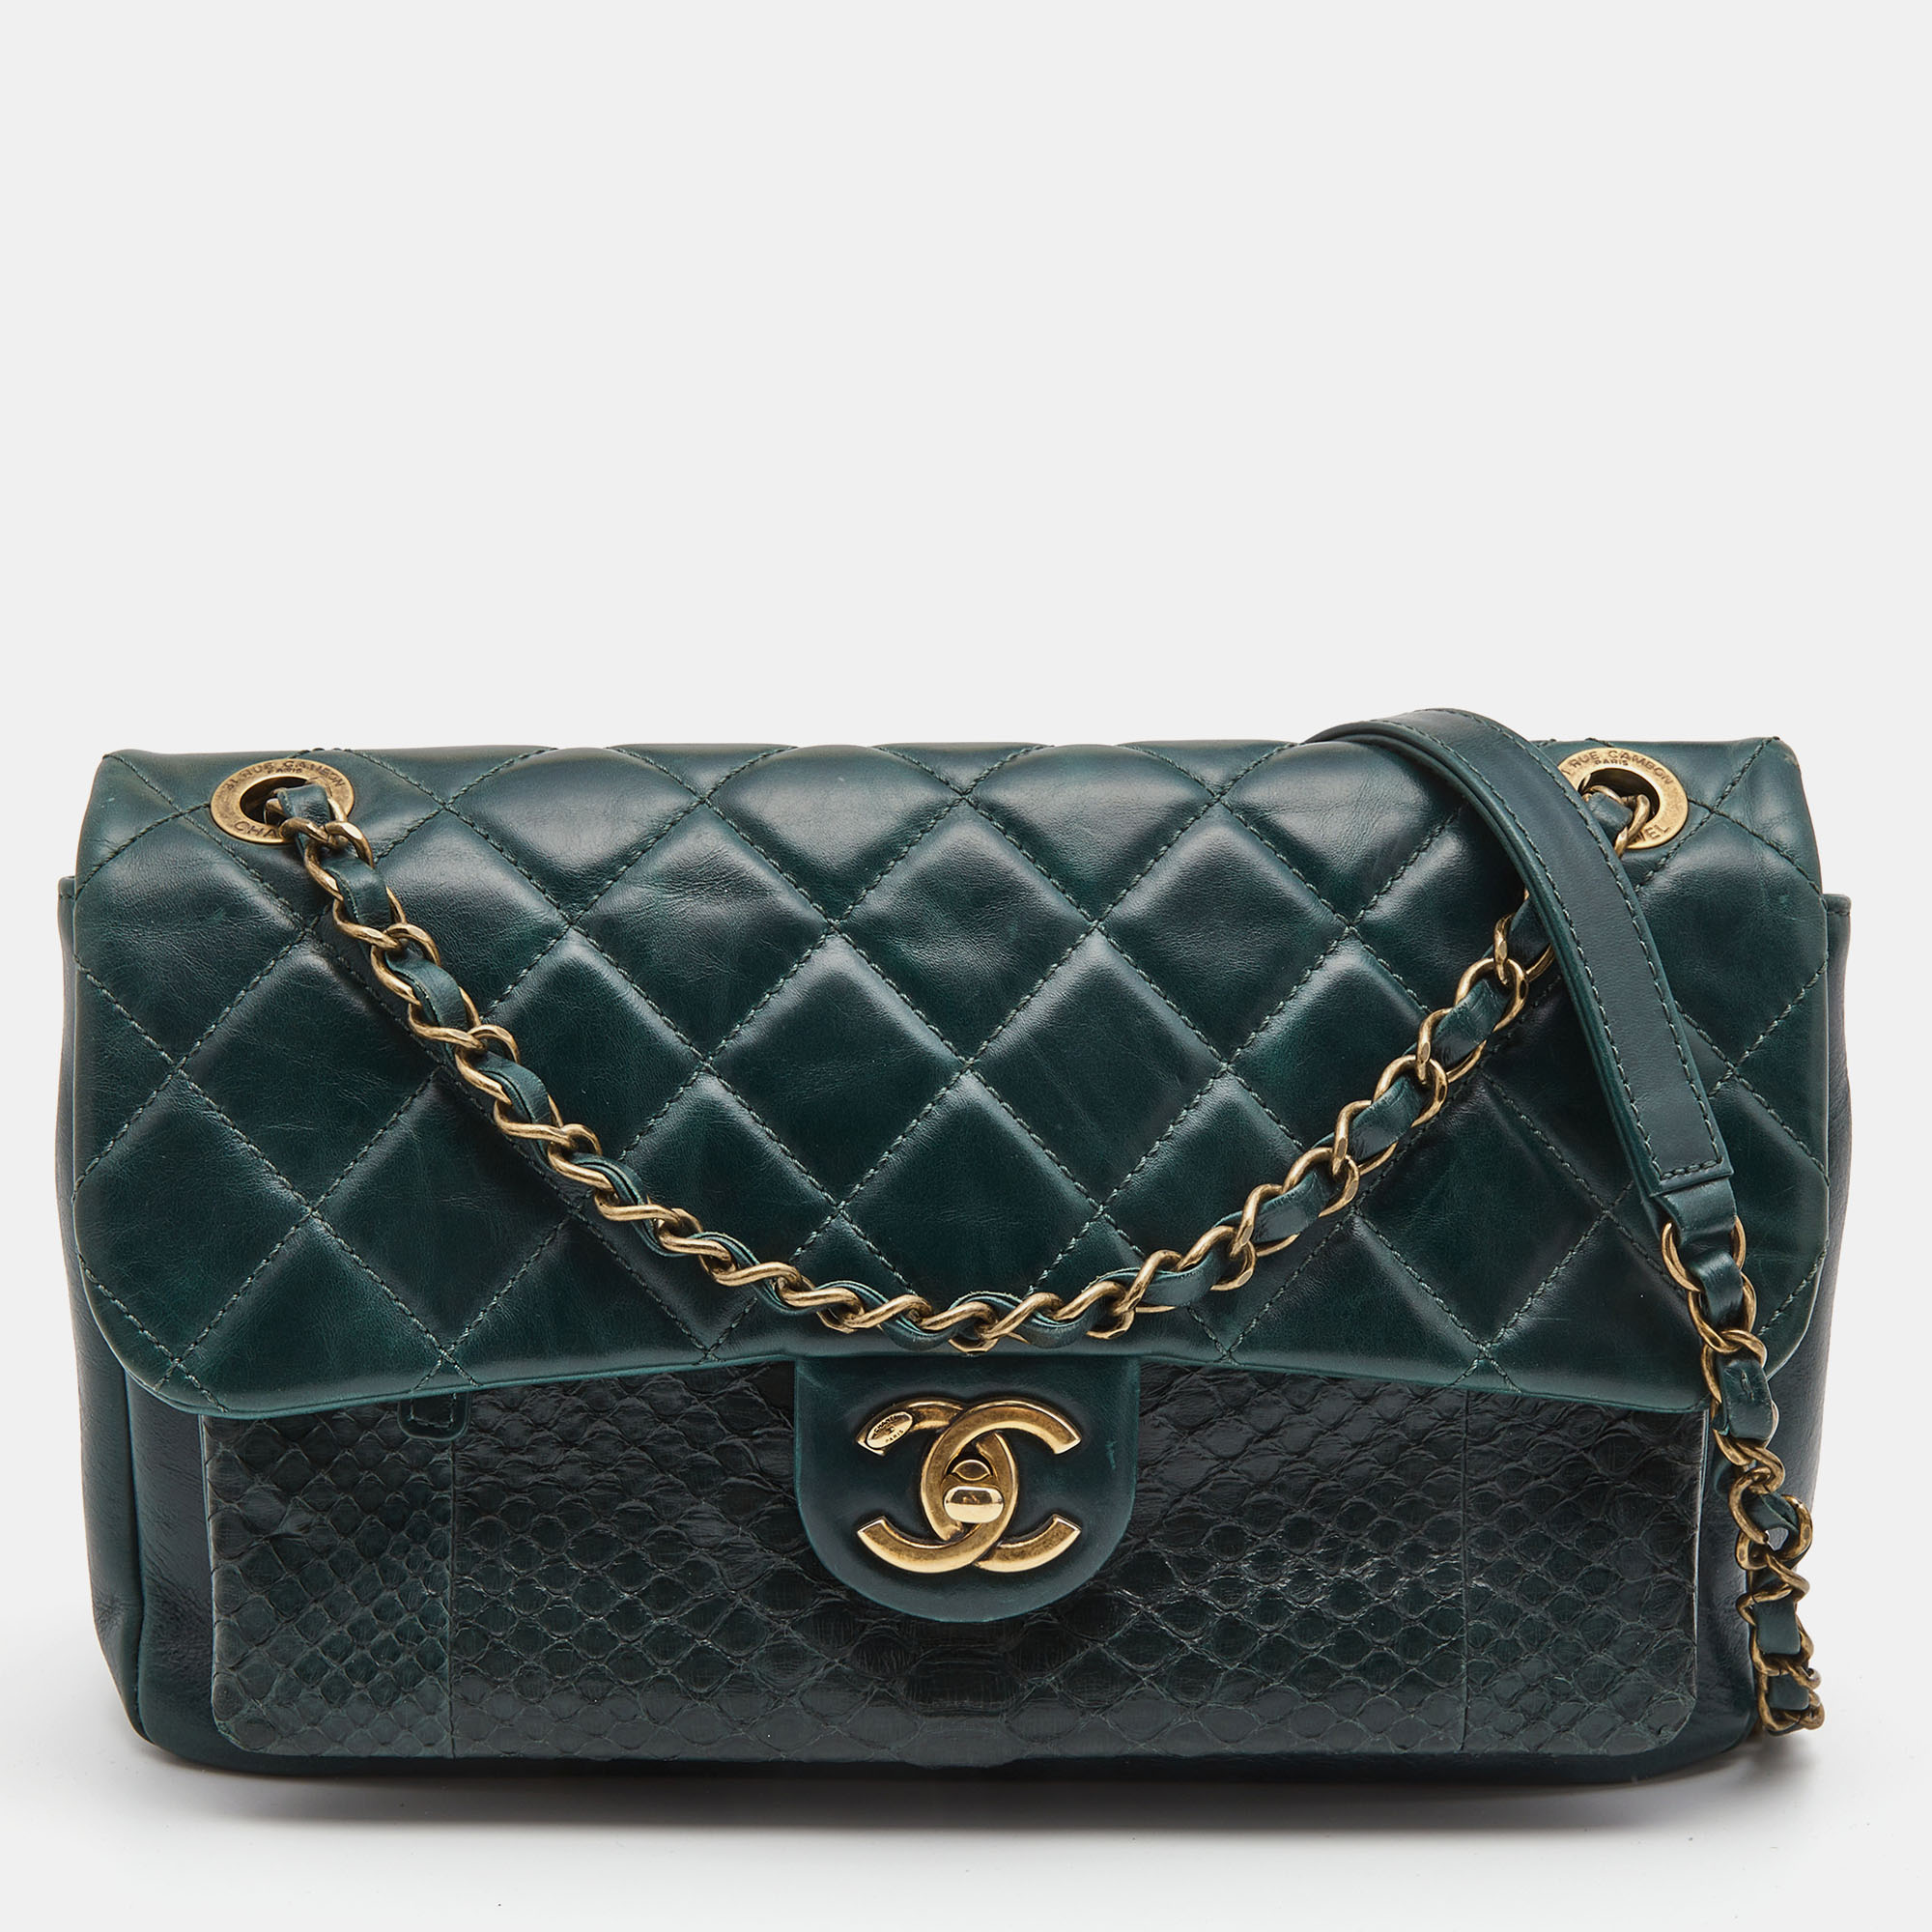 Pre-owned Chanel Green Quilted Leather And Python Urban Mix Flap Bag